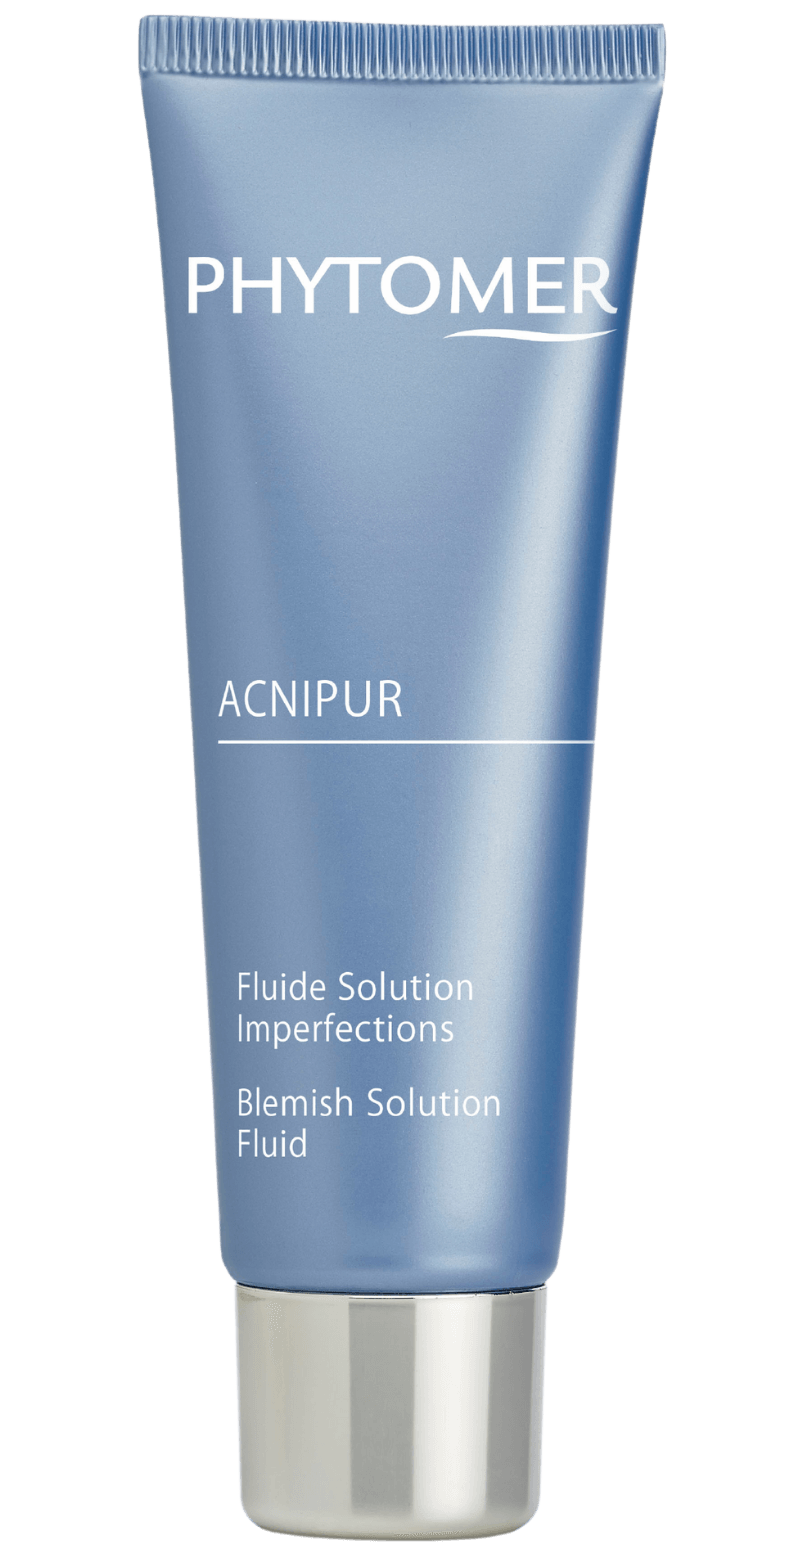 &#39;s Phytomer ACNIPUR Blemish Solution Fluid - Bellini&#39;s Skin and Parfumerie 